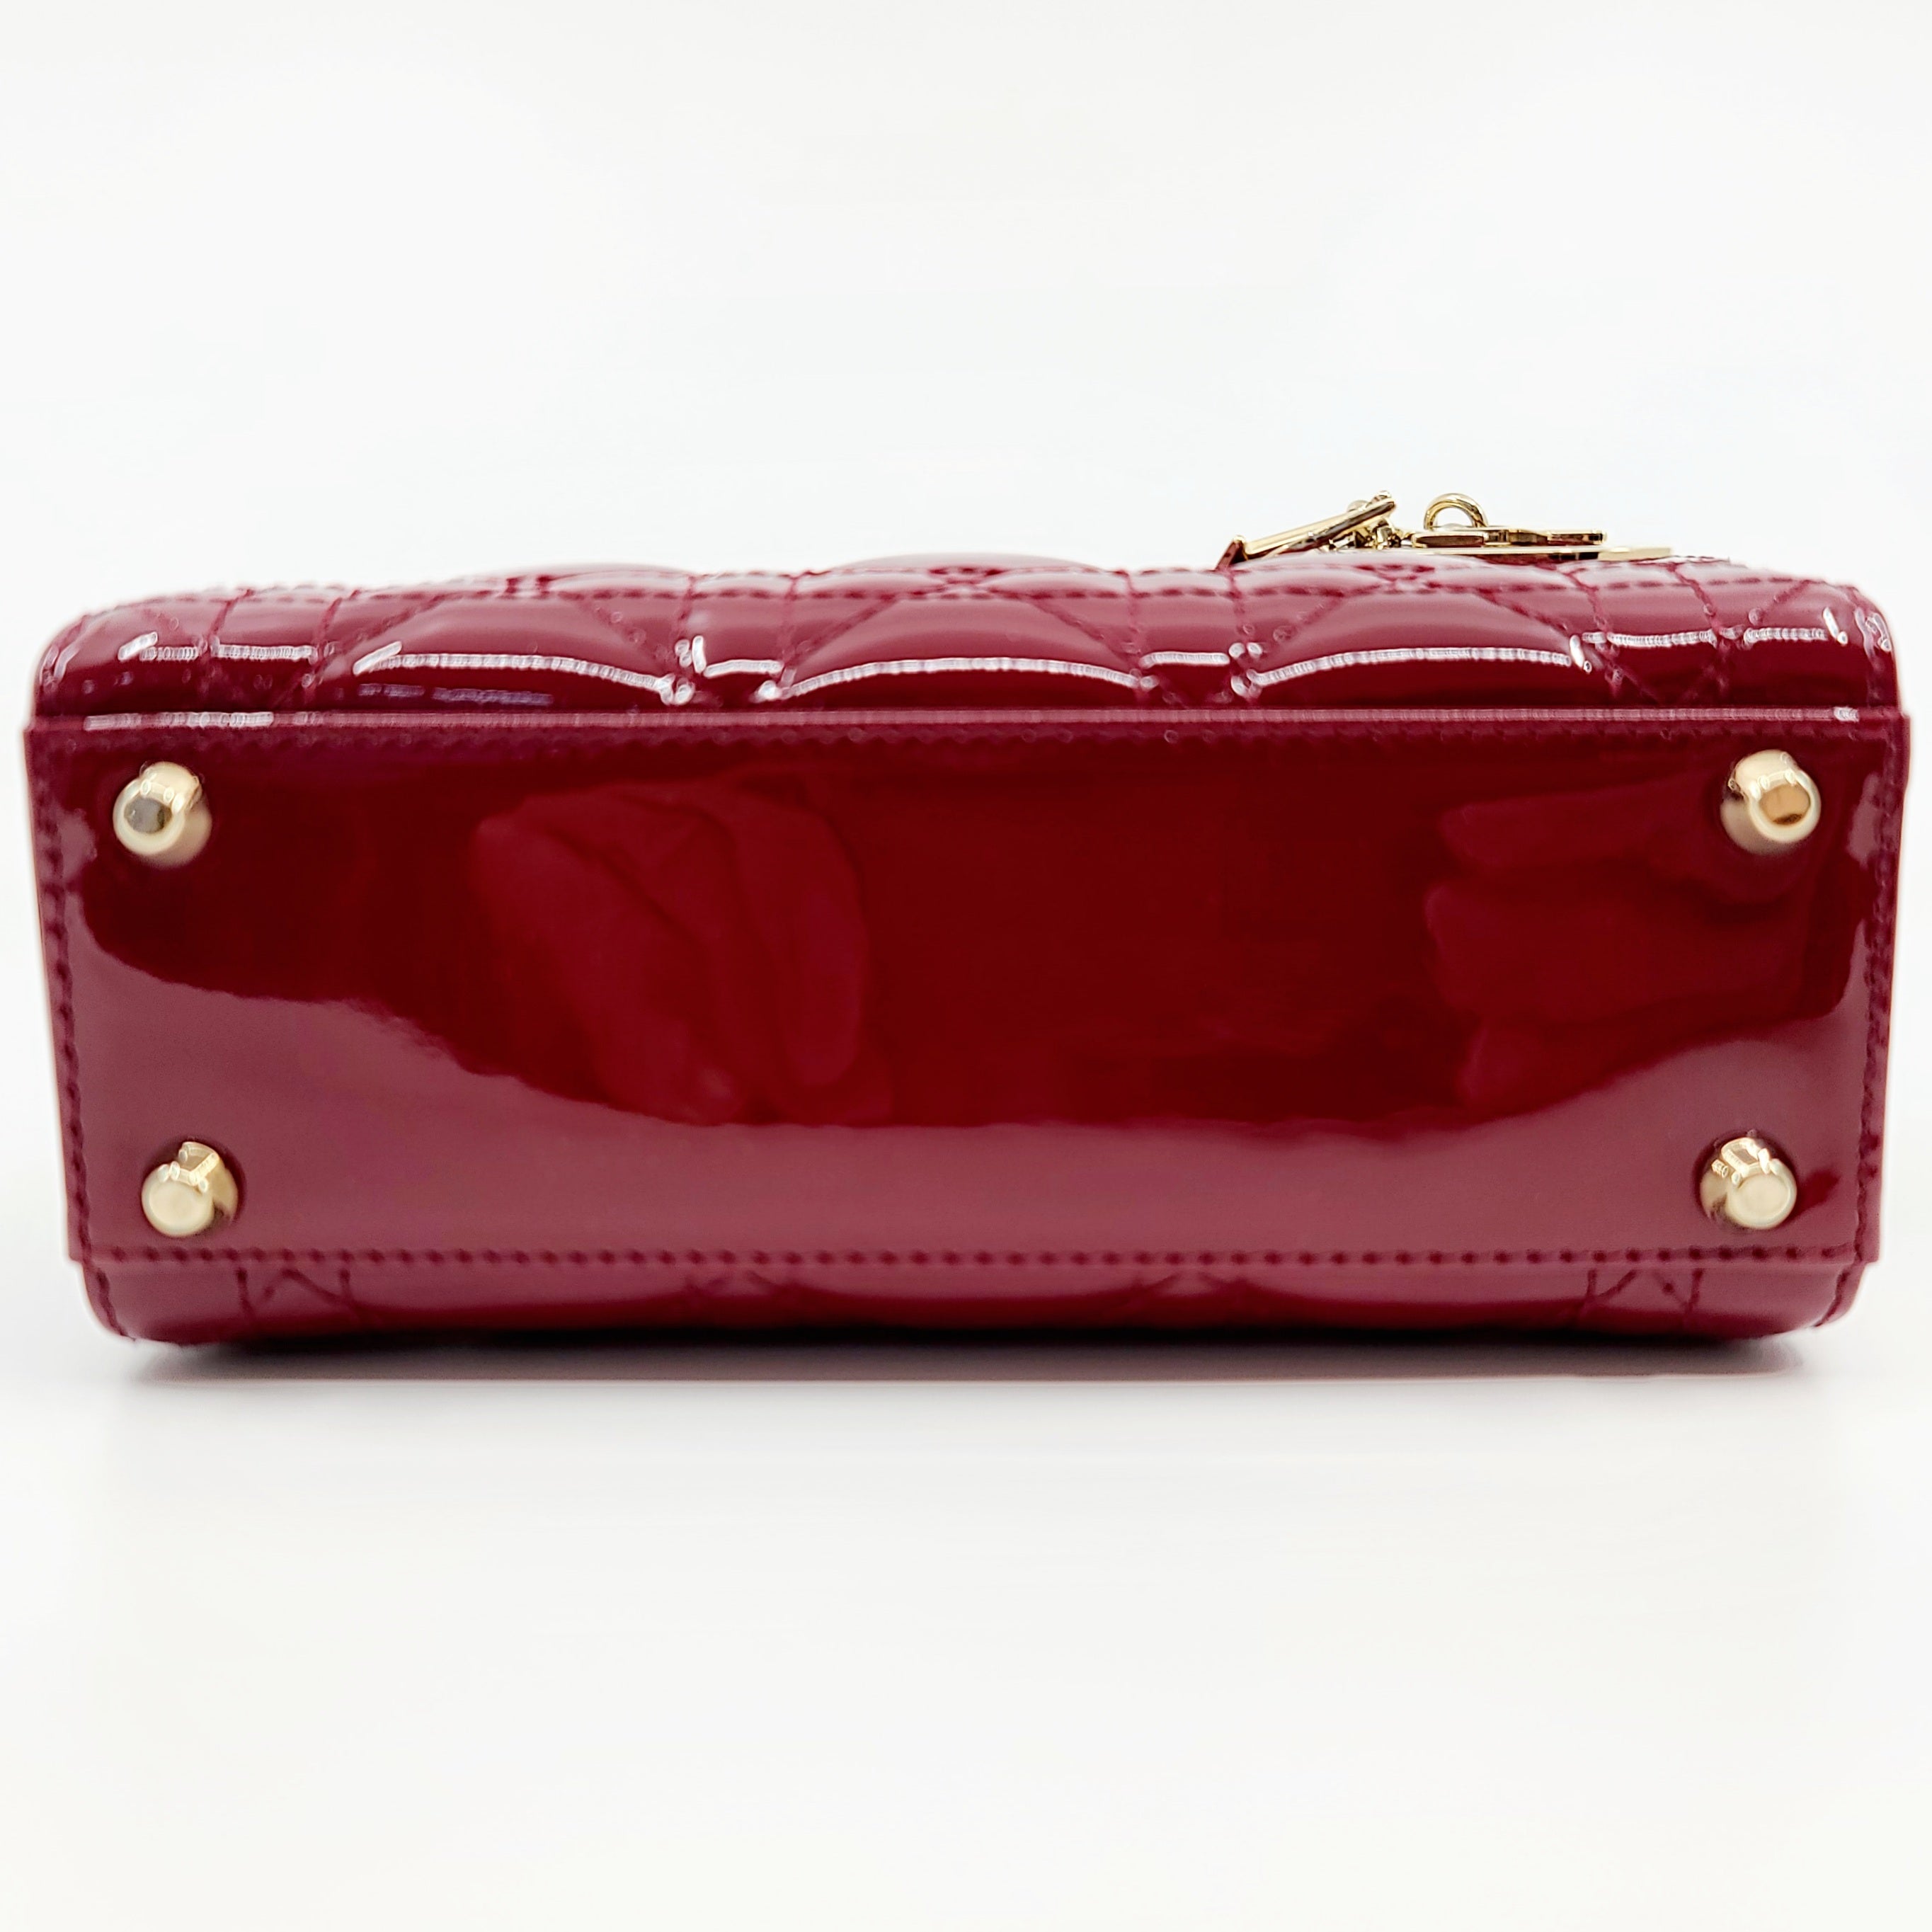 Brand New MINI LADY DIOR BAG Cherry Red Patent Cannage Calfskin Reference: M0505OWCB_M323 Dior Price $4,900.00+tax